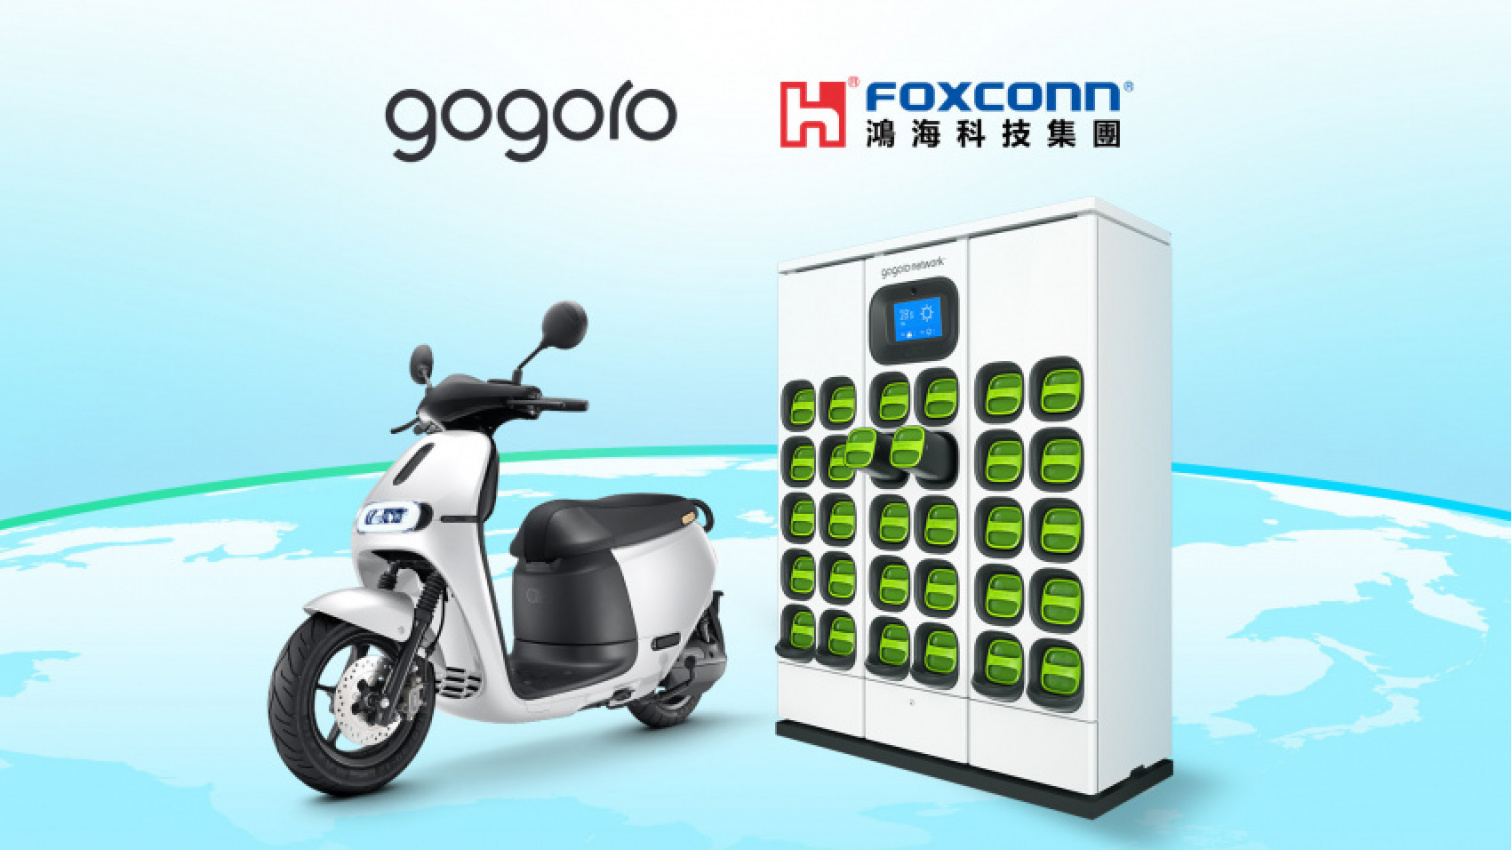 asia, autos, cars, smart, foxconn, gogoro, horace luke, young liu, foxconn and gogoro announce partnership to accelerate expansion of battery swapping system & smartscooters